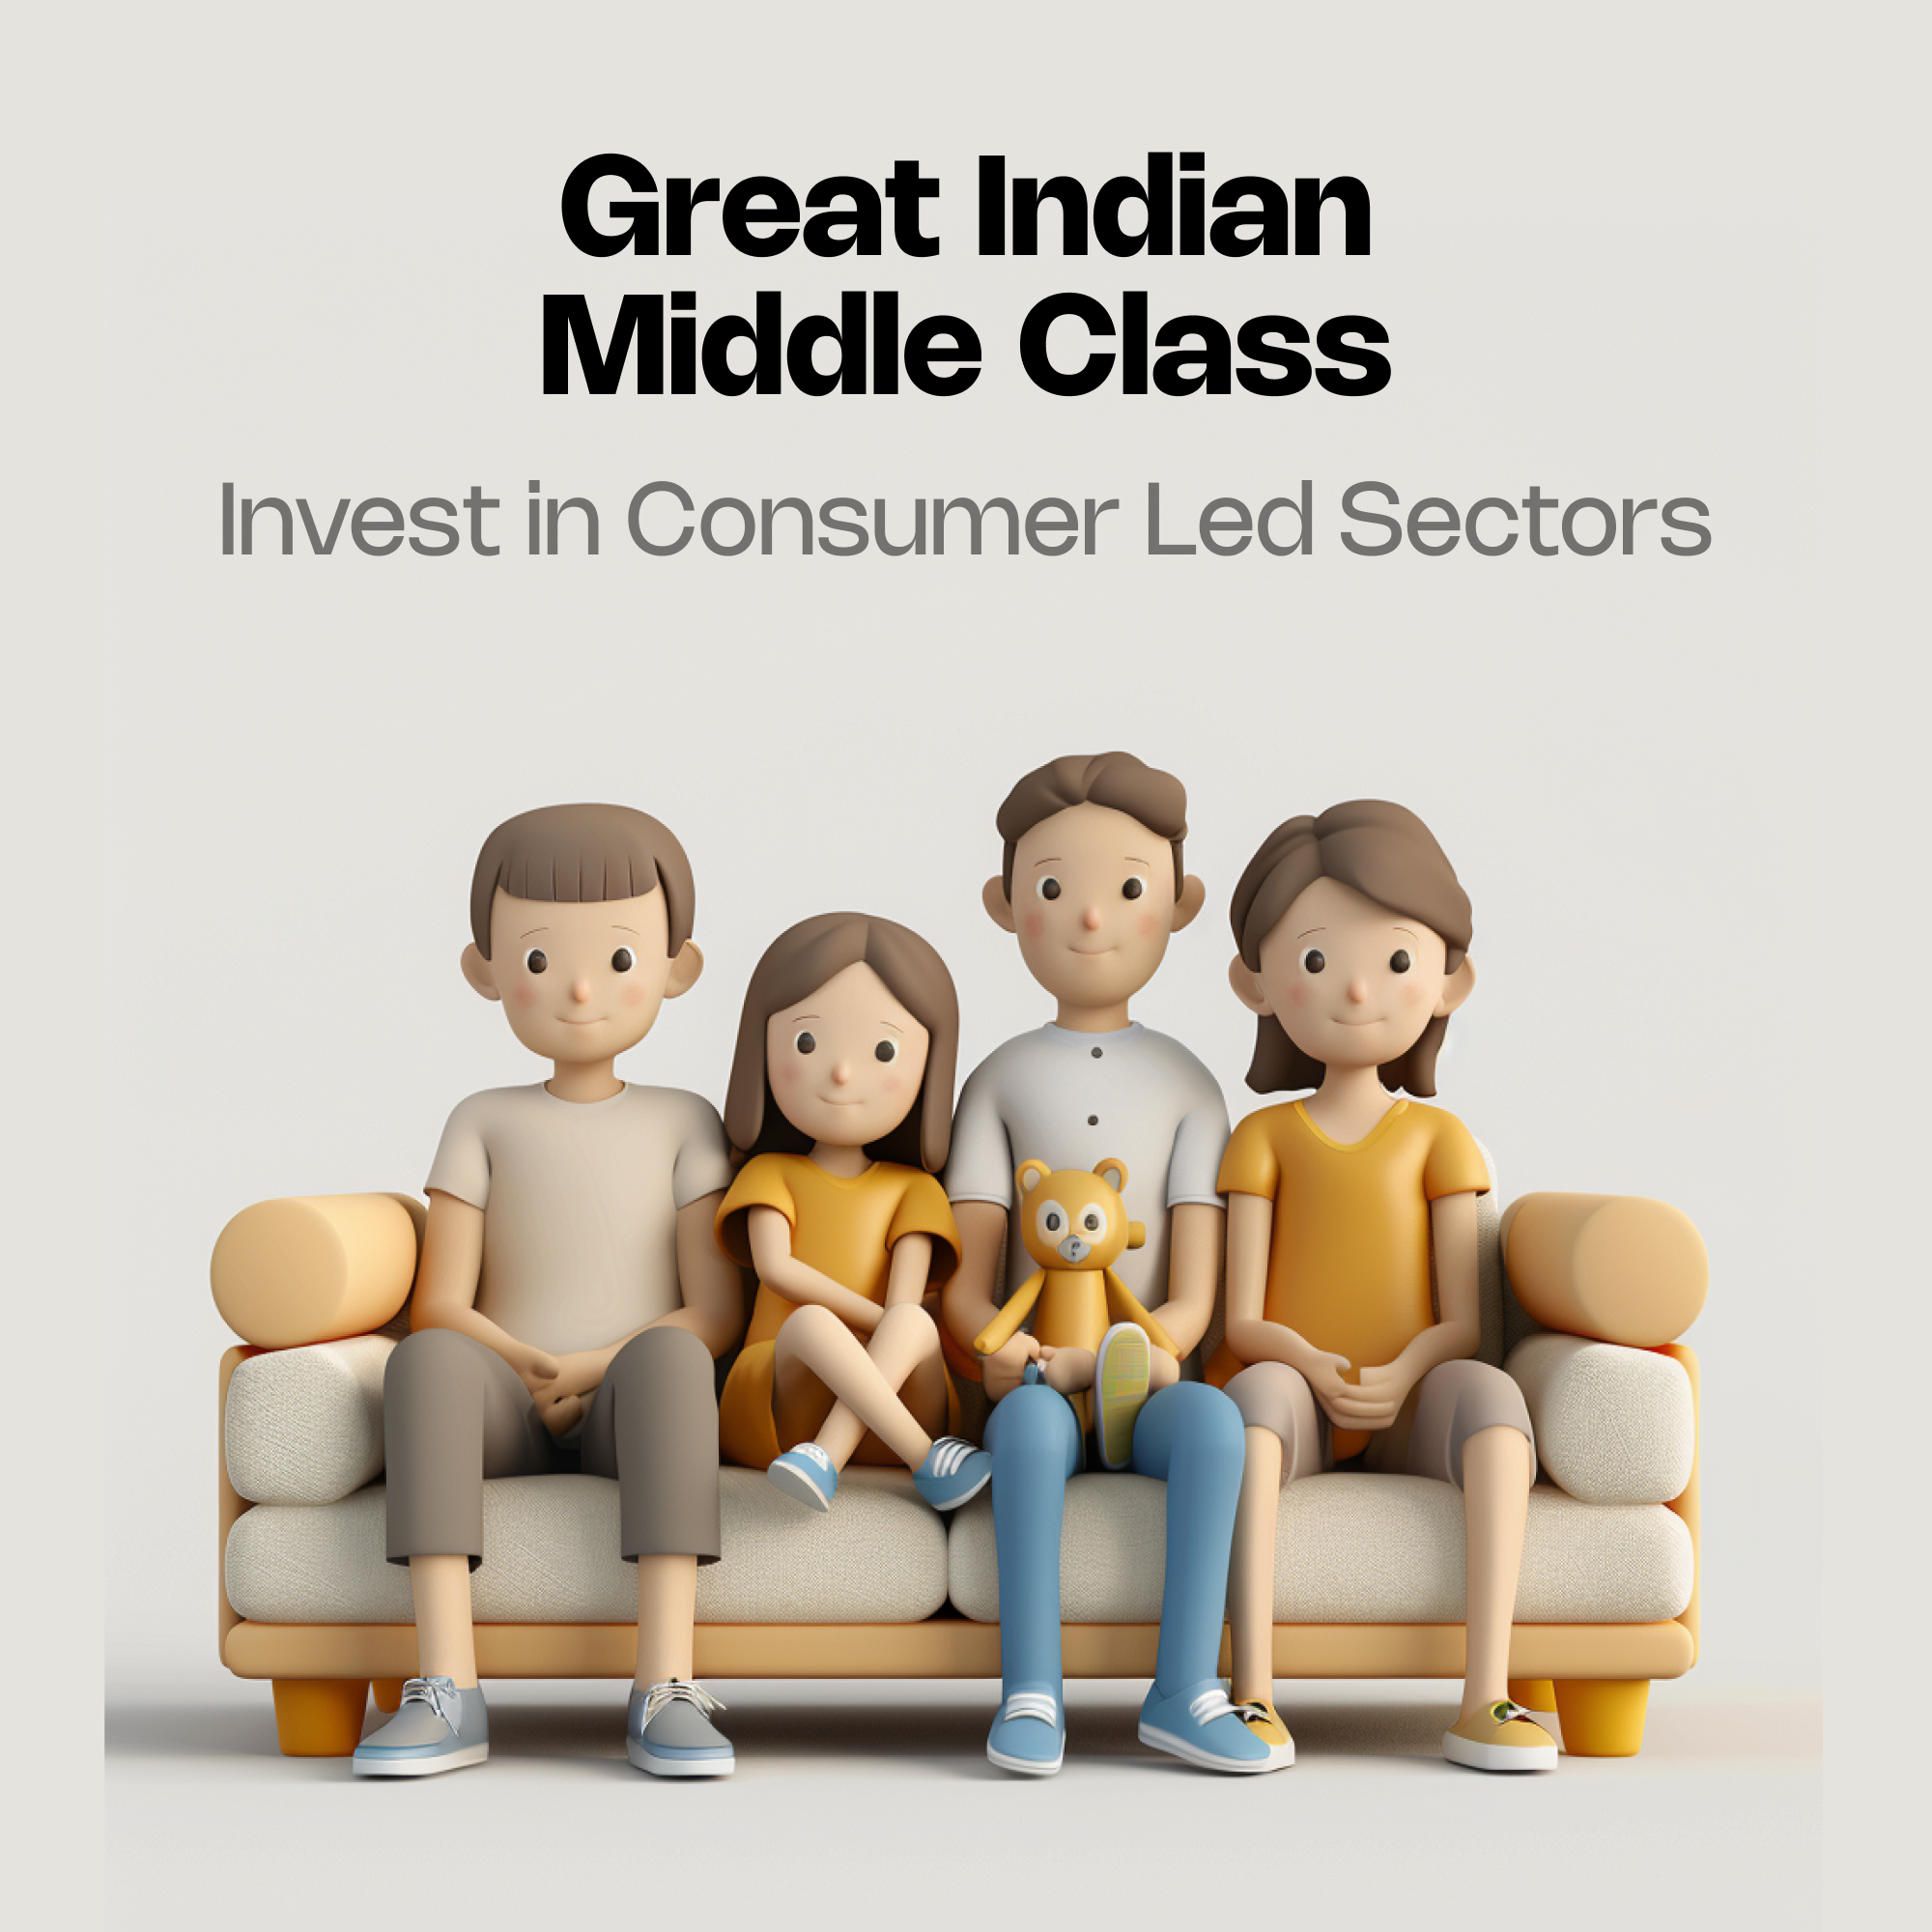 Great Indian Middle Class: Invest in Consumer Led Sectors